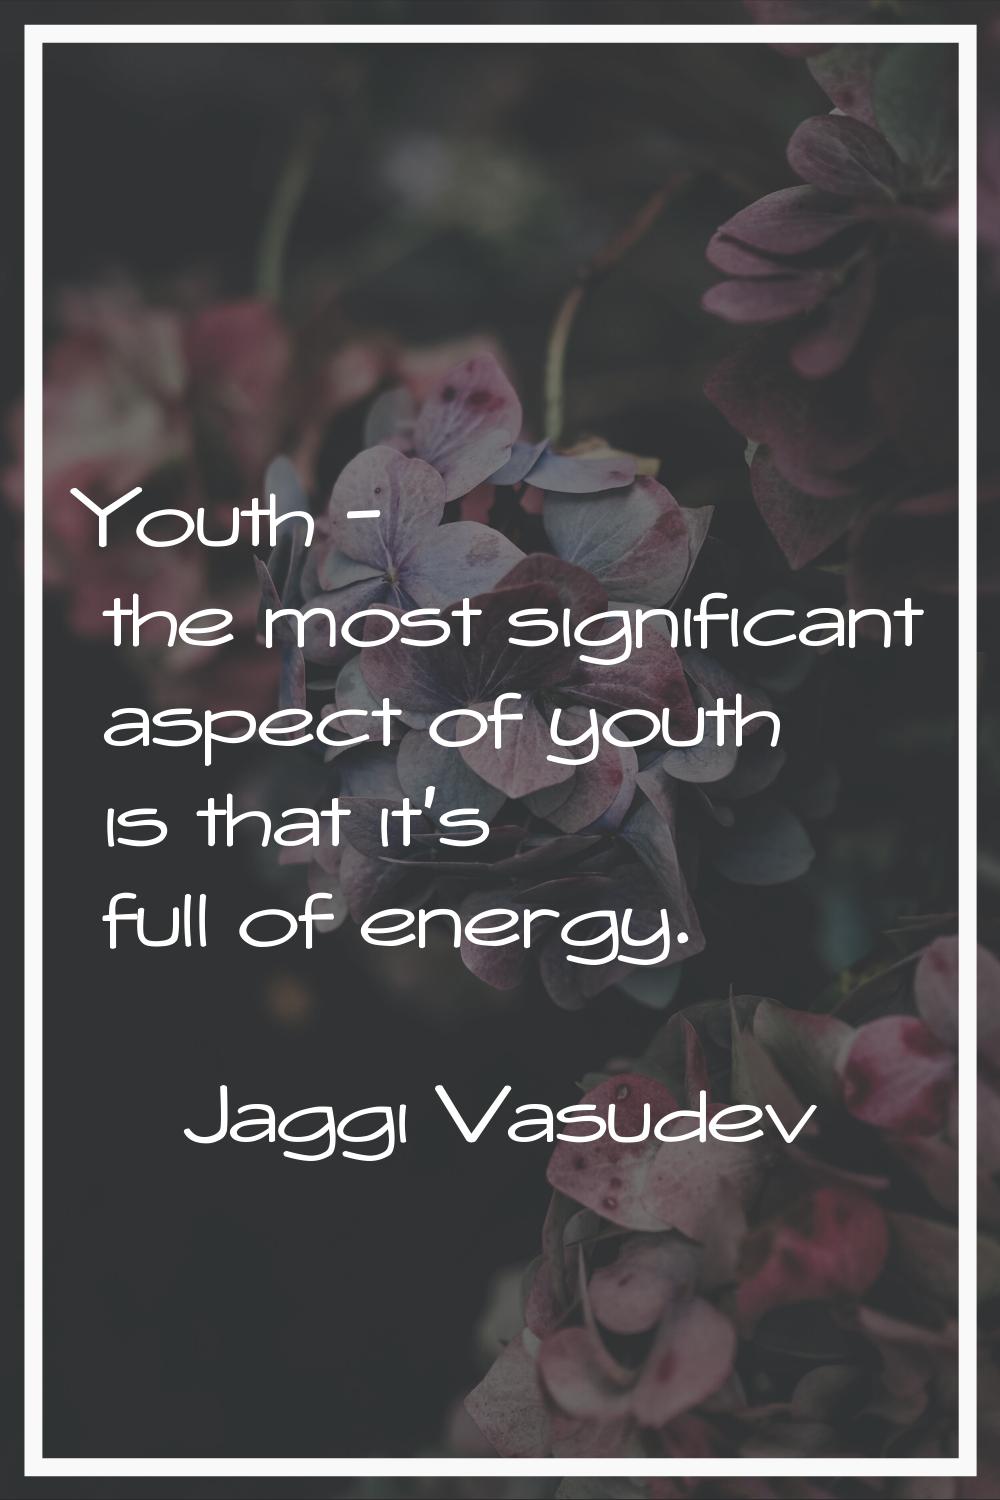 Youth - the most significant aspect of youth is that it's full of energy.